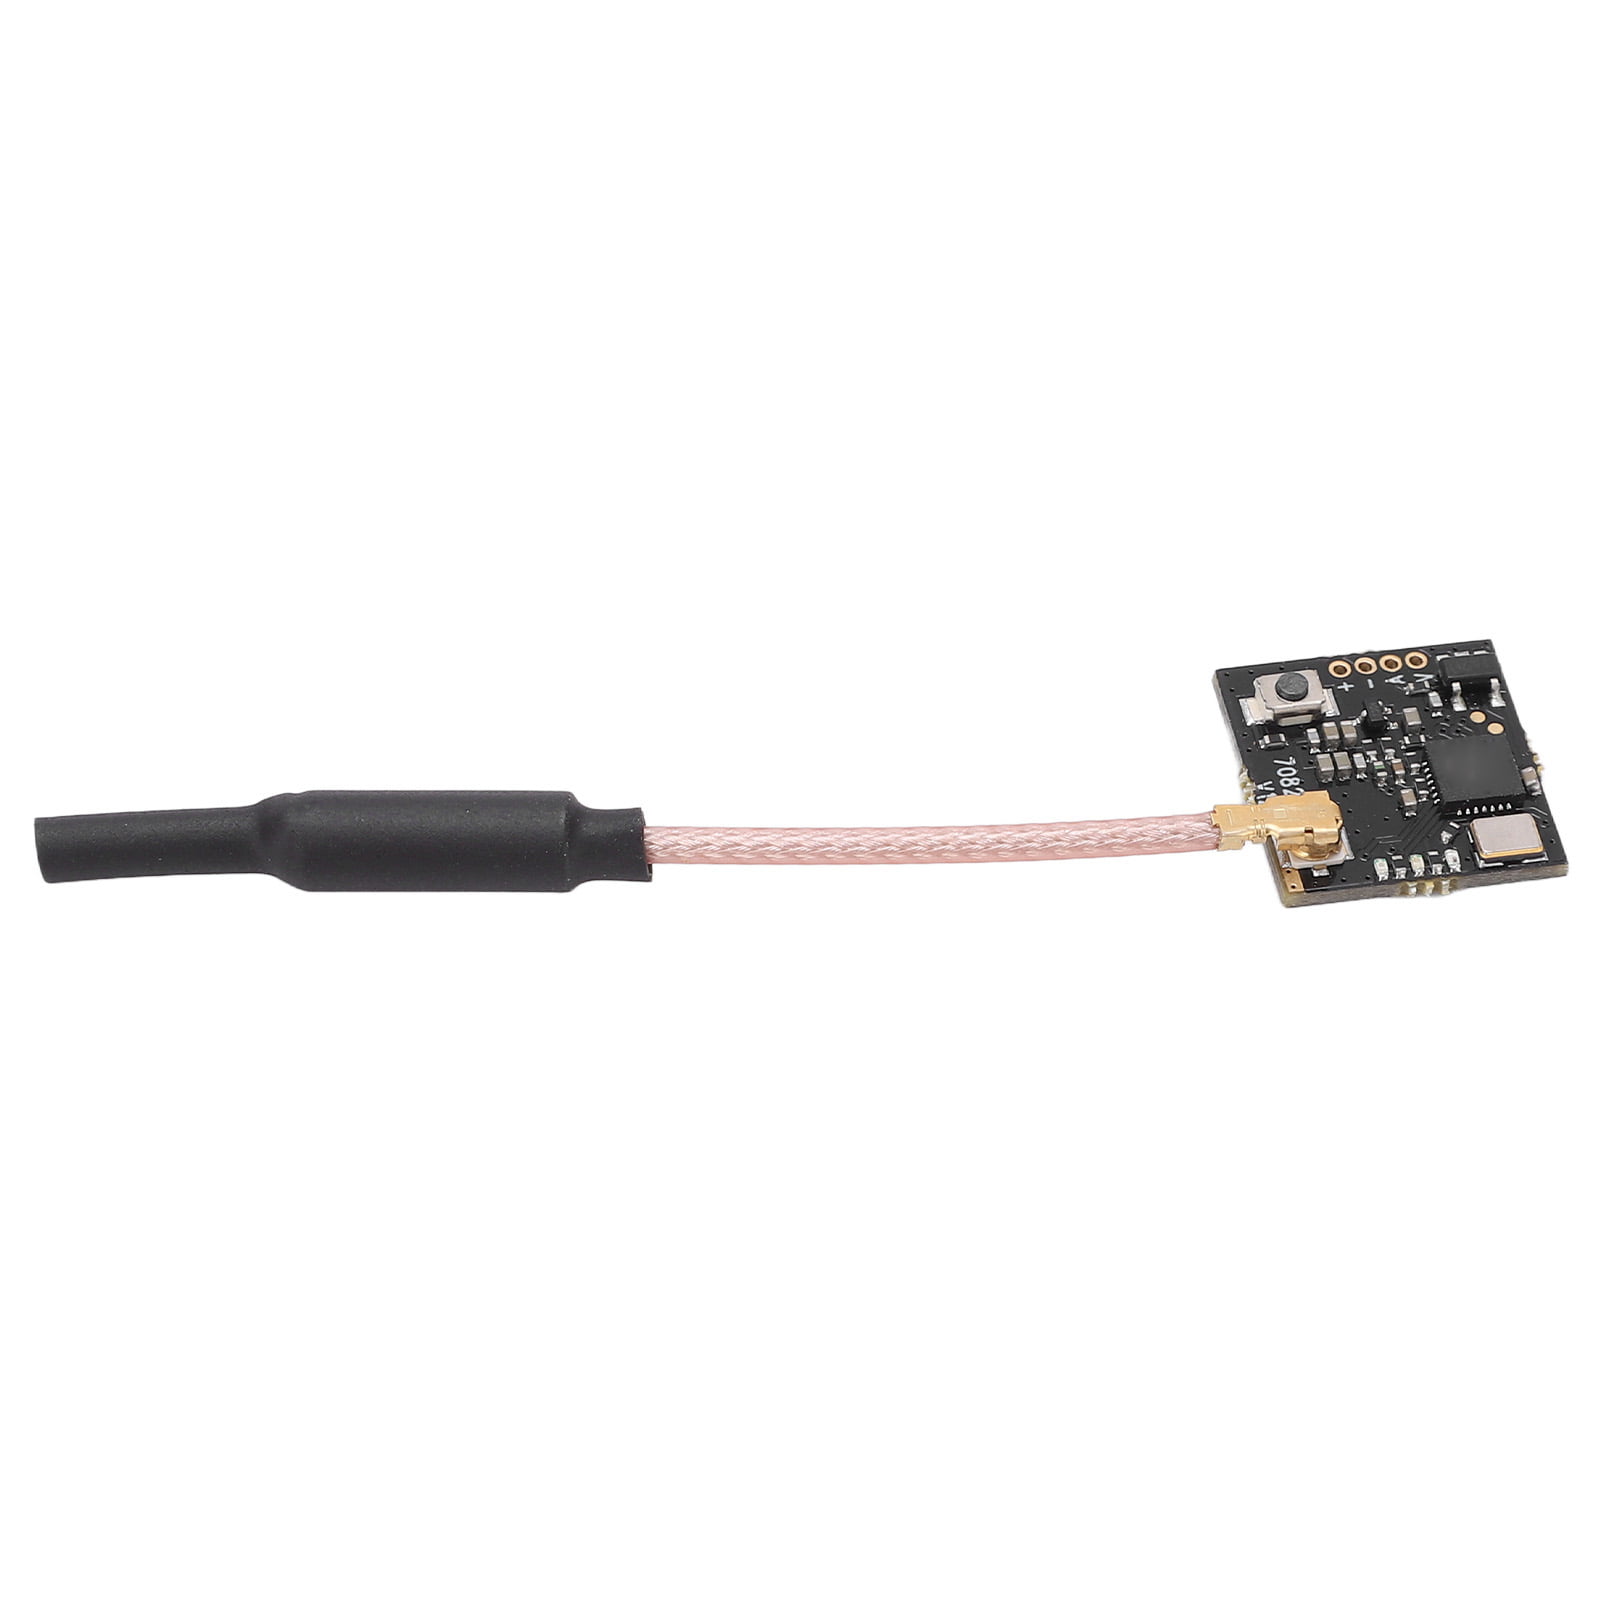 Black FPV Transmitter for Convenient Outdoor/Indoor Use